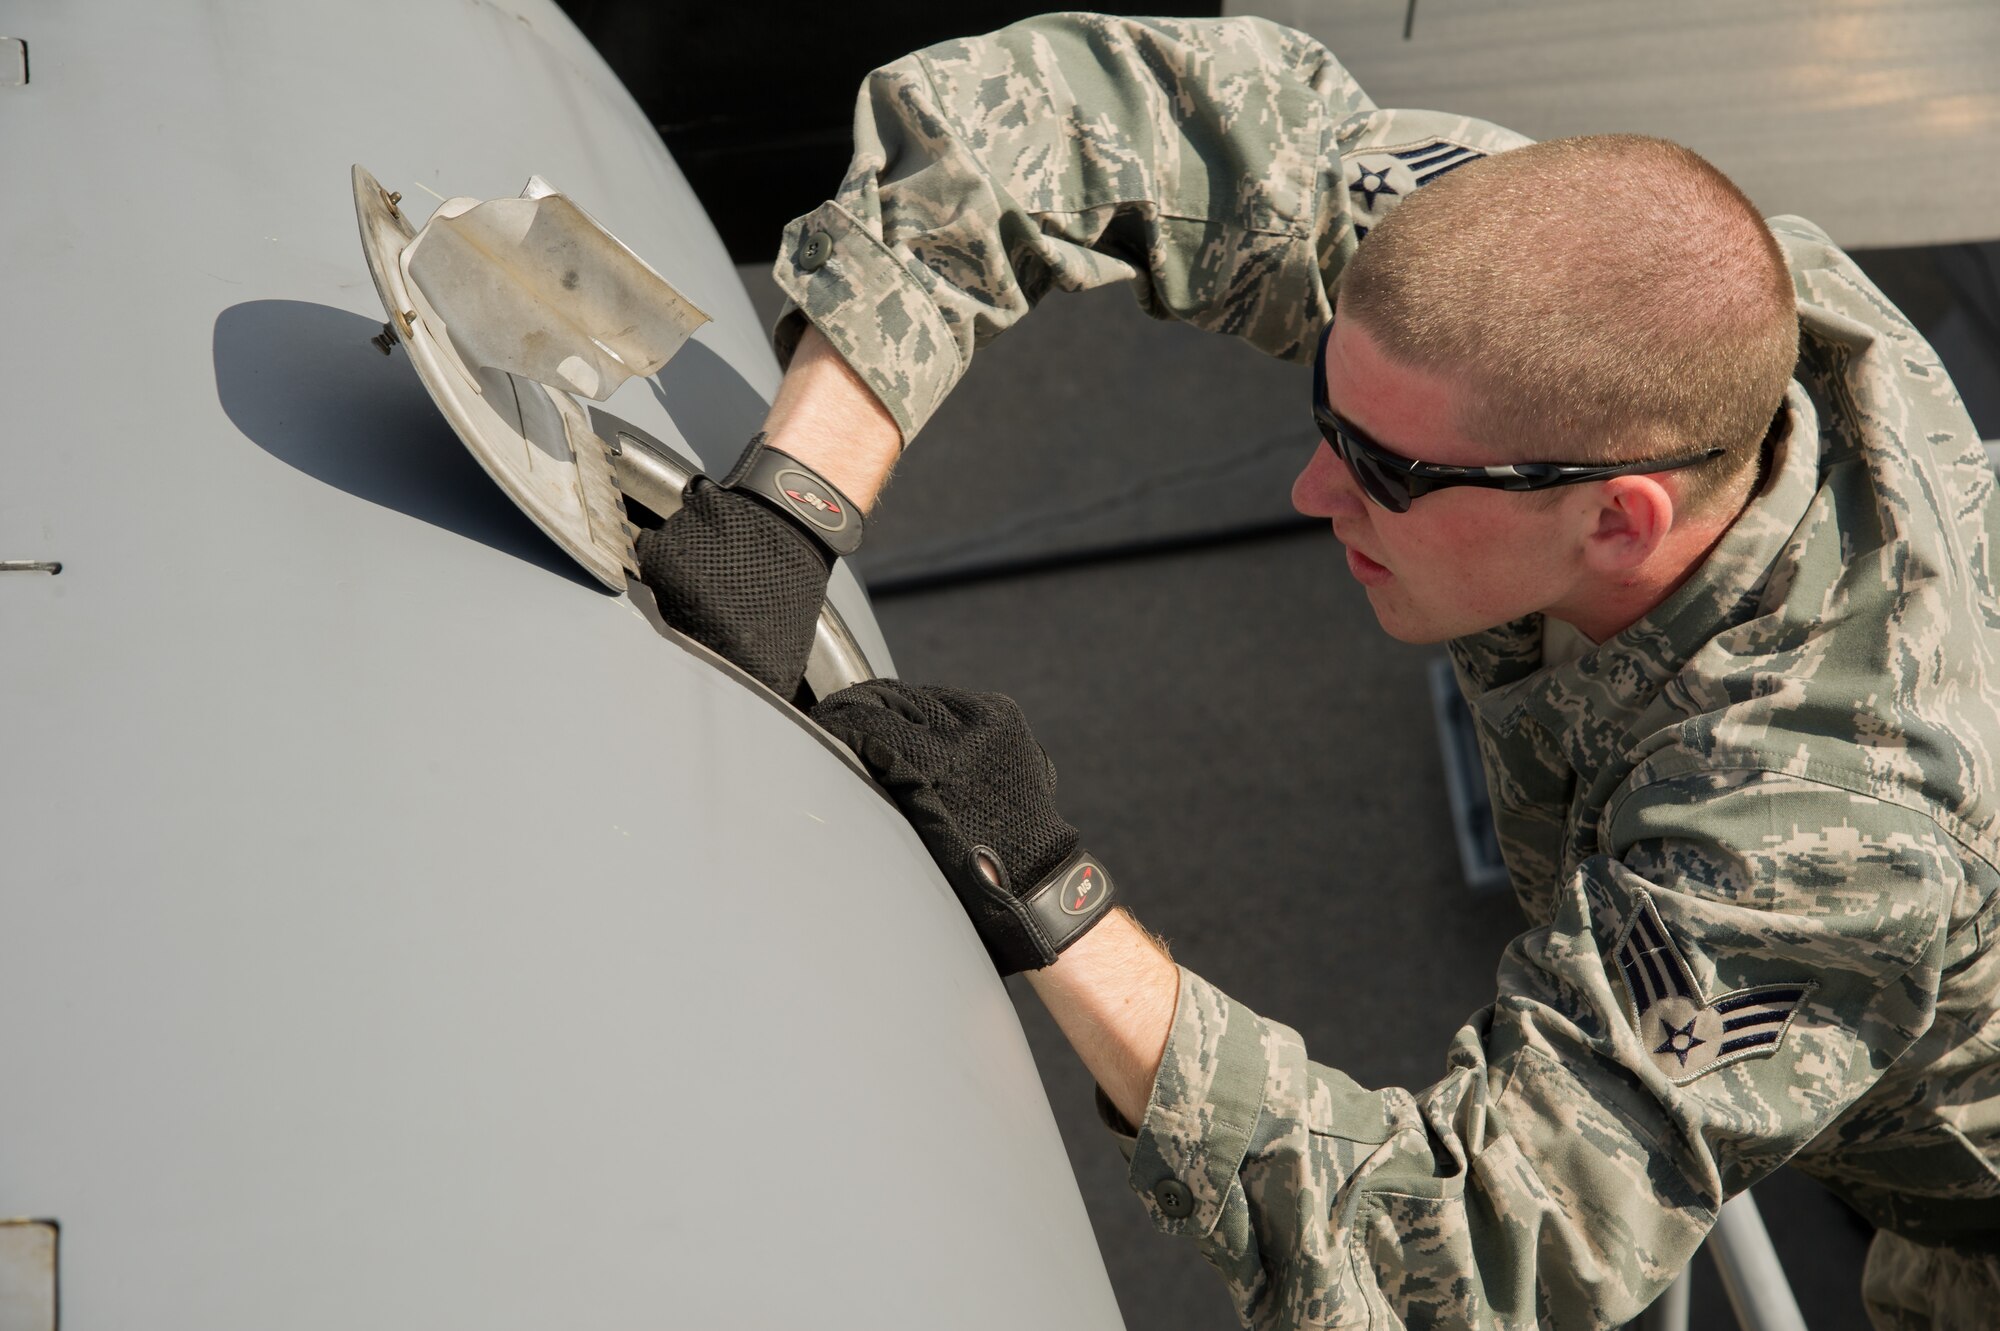 U.S. Air Force Senior Airman Kevin Foley, crew chief, 914th Airlift Wing, Niagara Falls Air Reserve Station, N.Y., checks the oil on the number 2 engine of a C-130 Hercules aircraft during Maple Flag 47 in Edmonton/Cold Lake, Alberta, Canada, May 30, 2014. Maple Flag is an international exercise designed to enhance the interoperability of C-130 aircrews, maintainers and support specialists in a simulated combat environment. (U.S. Air Force photo by Tech. Sgt. Matthew Smith)